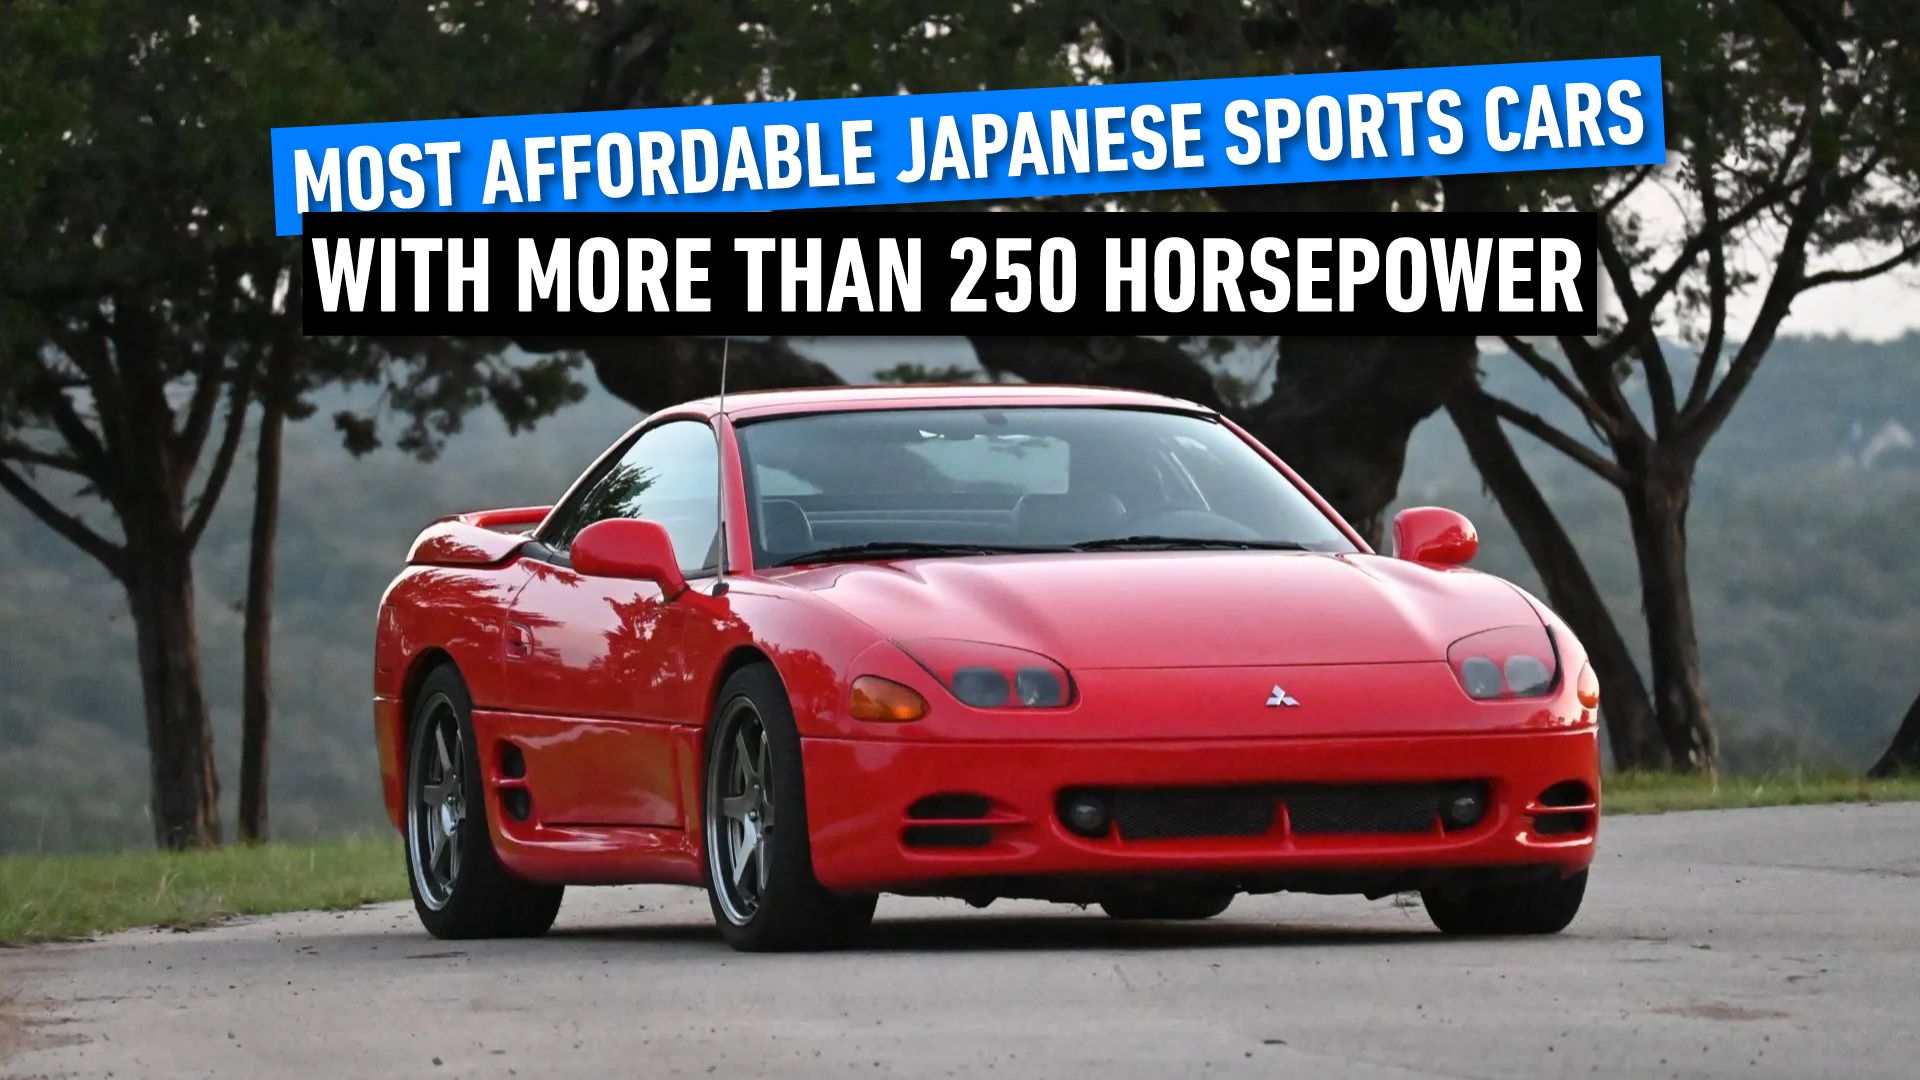 Most Affordable Japanese Sports Cars With More Than 250 Horsepower Featured Image